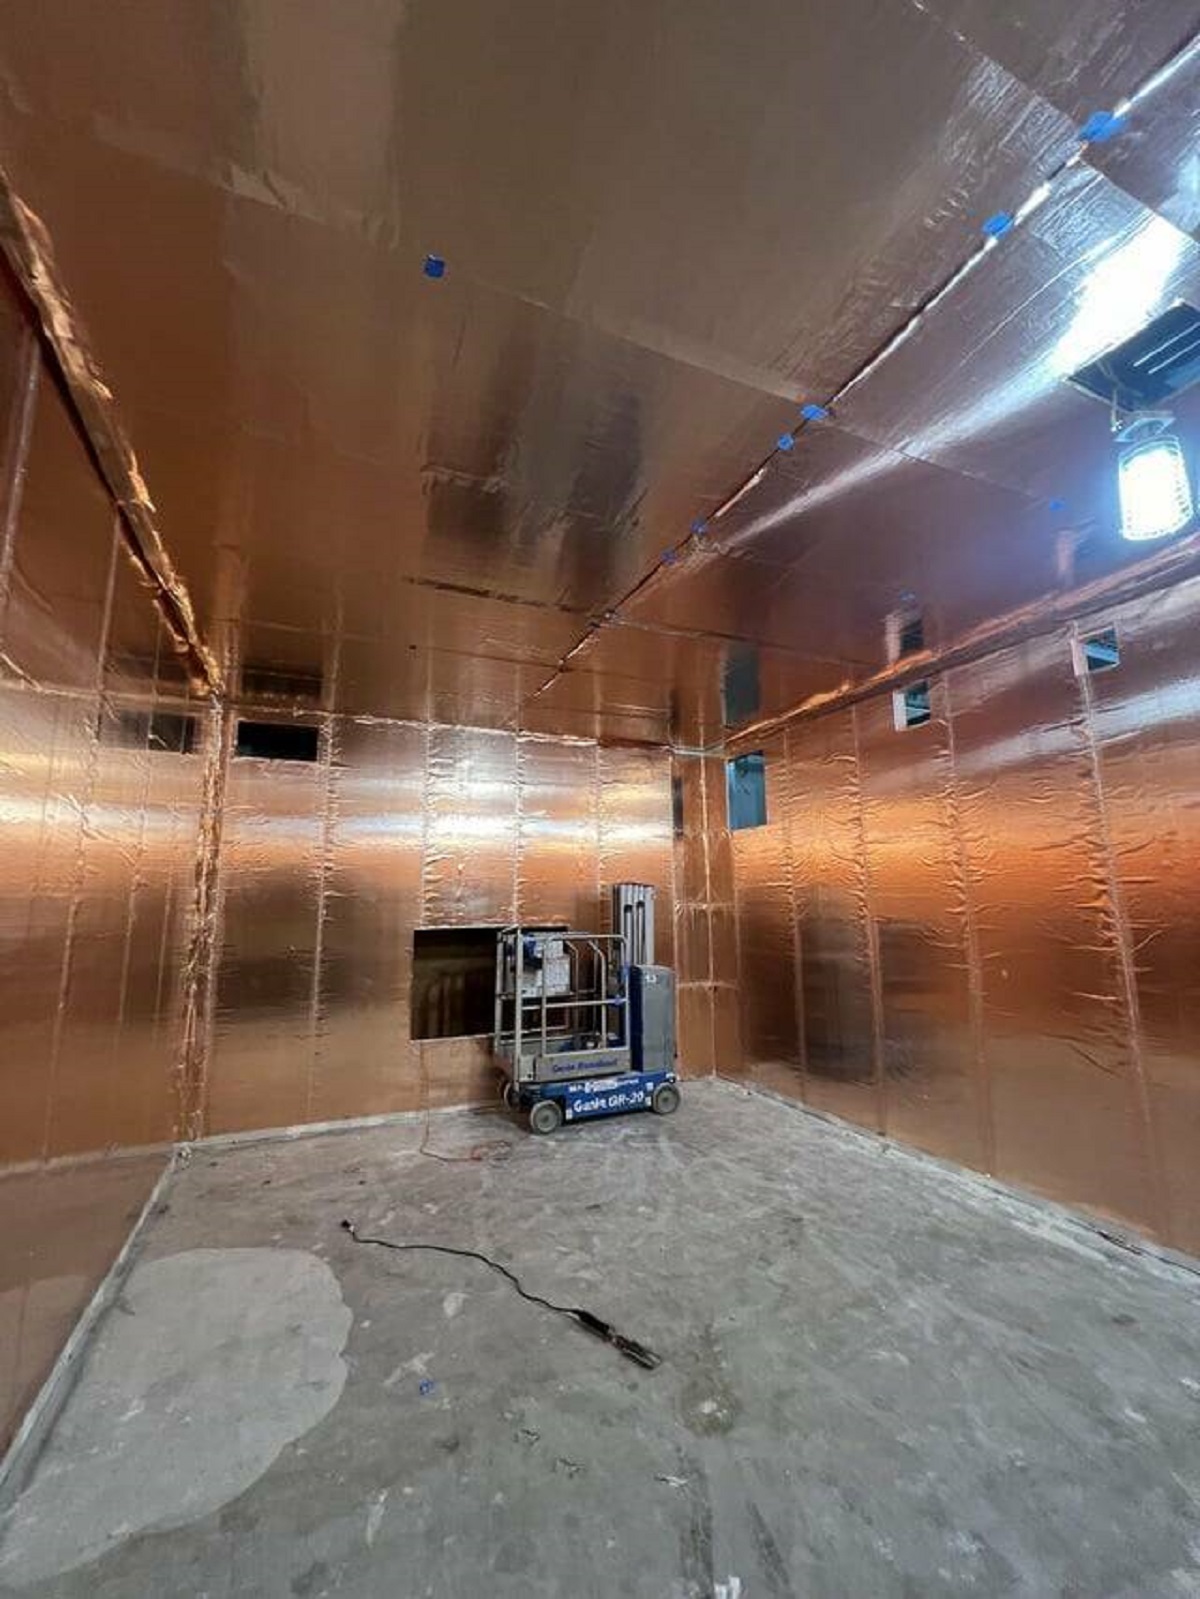 "An MRI room under construction, coated with copper wallpaper"